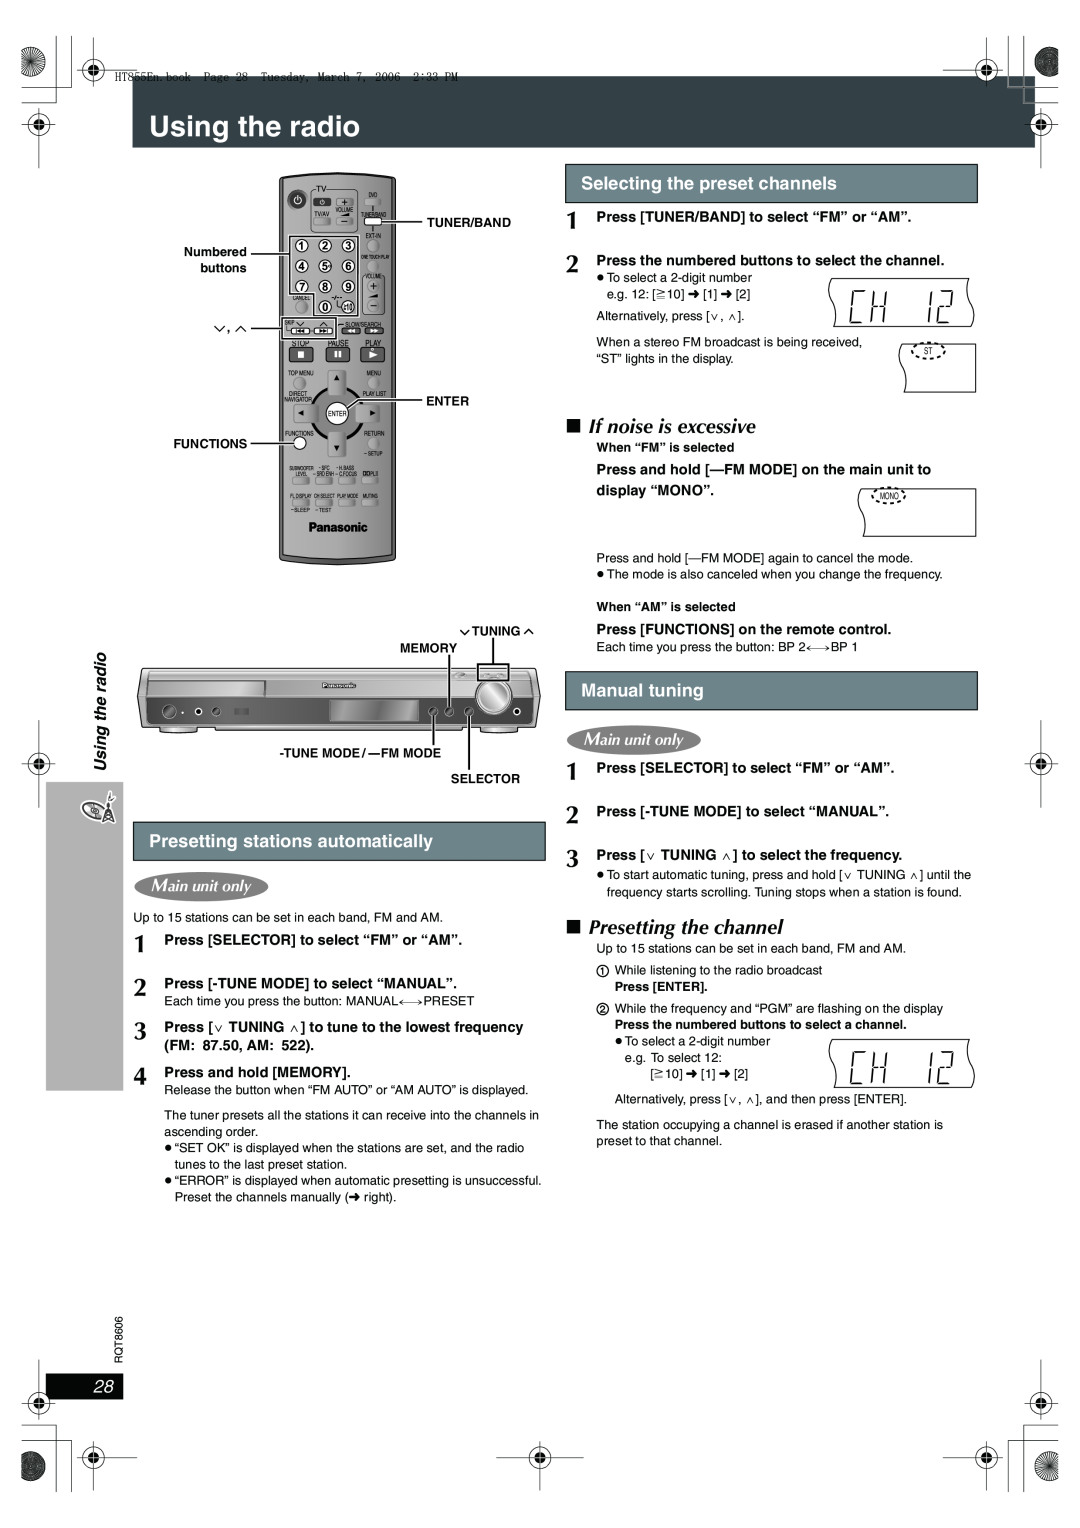 Panasonic SC-HT855 Using the radio, ∫If noise is excessive, ∫Presetting the channel, Presetting stations automatically 